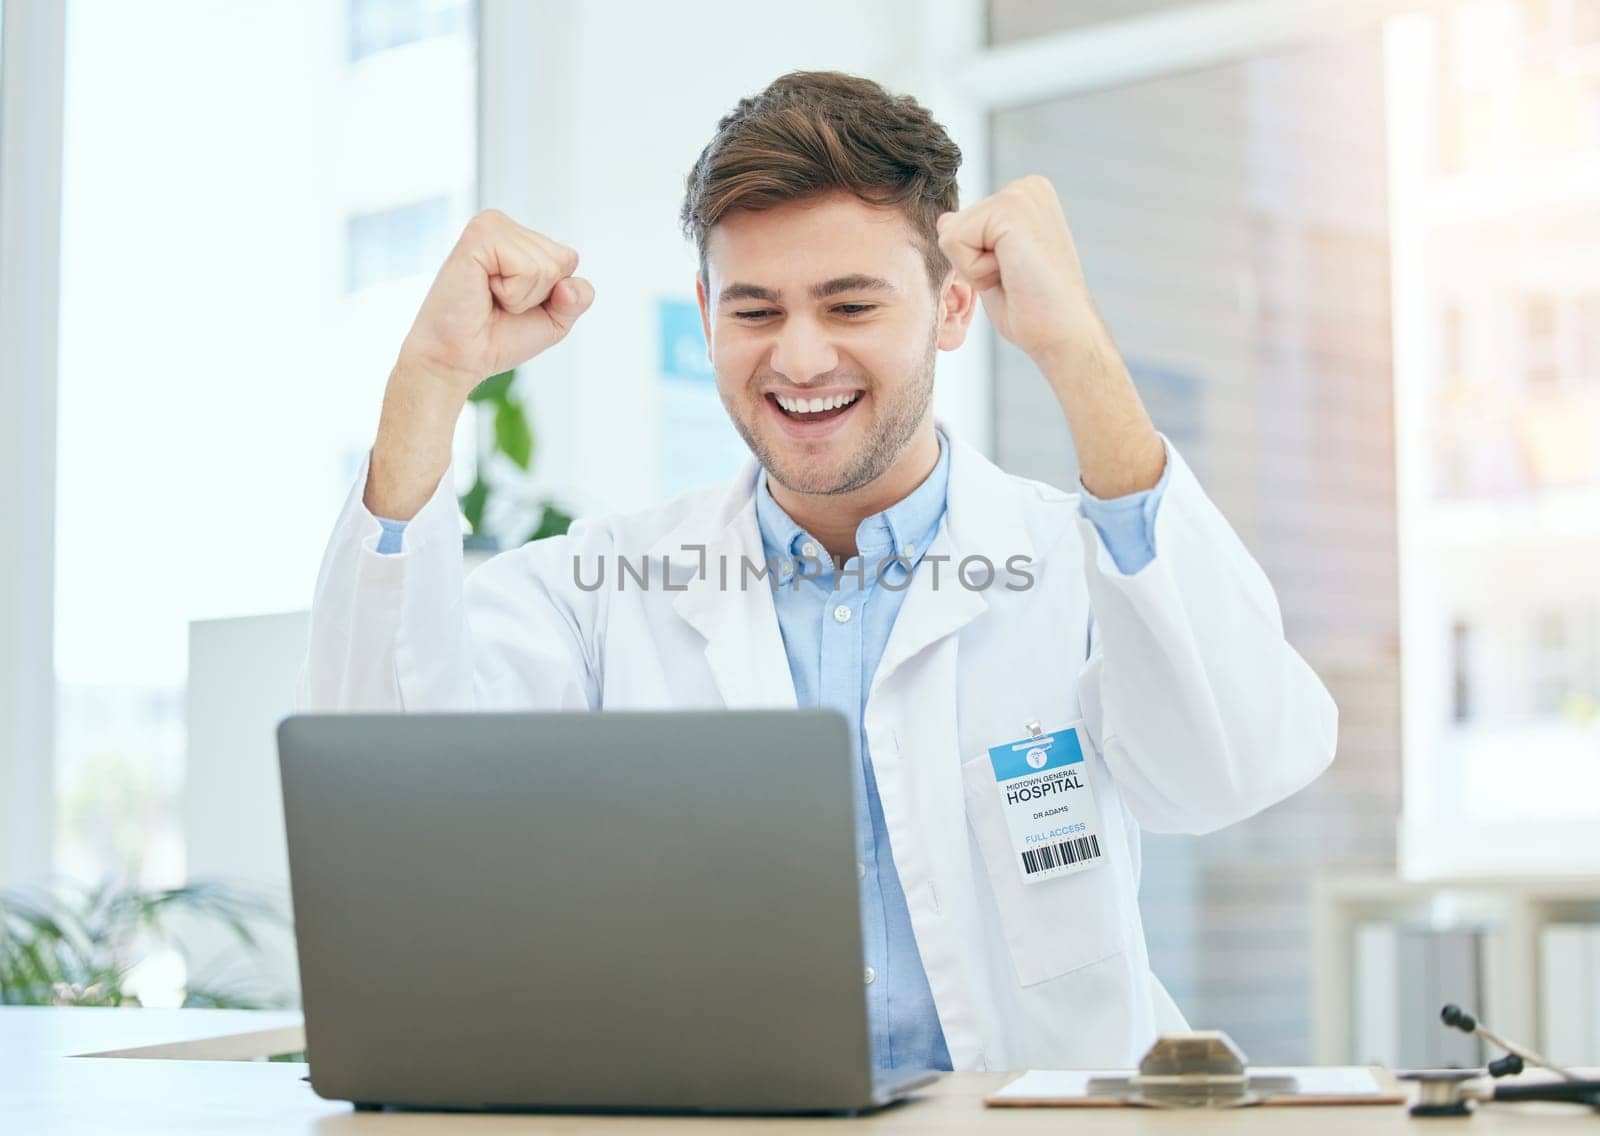 Success, medical and laptop with doctor in hospital and cheering for celebration, report or achievement. Winner, research and technology with man reading good news for healthcare, medicine or science.